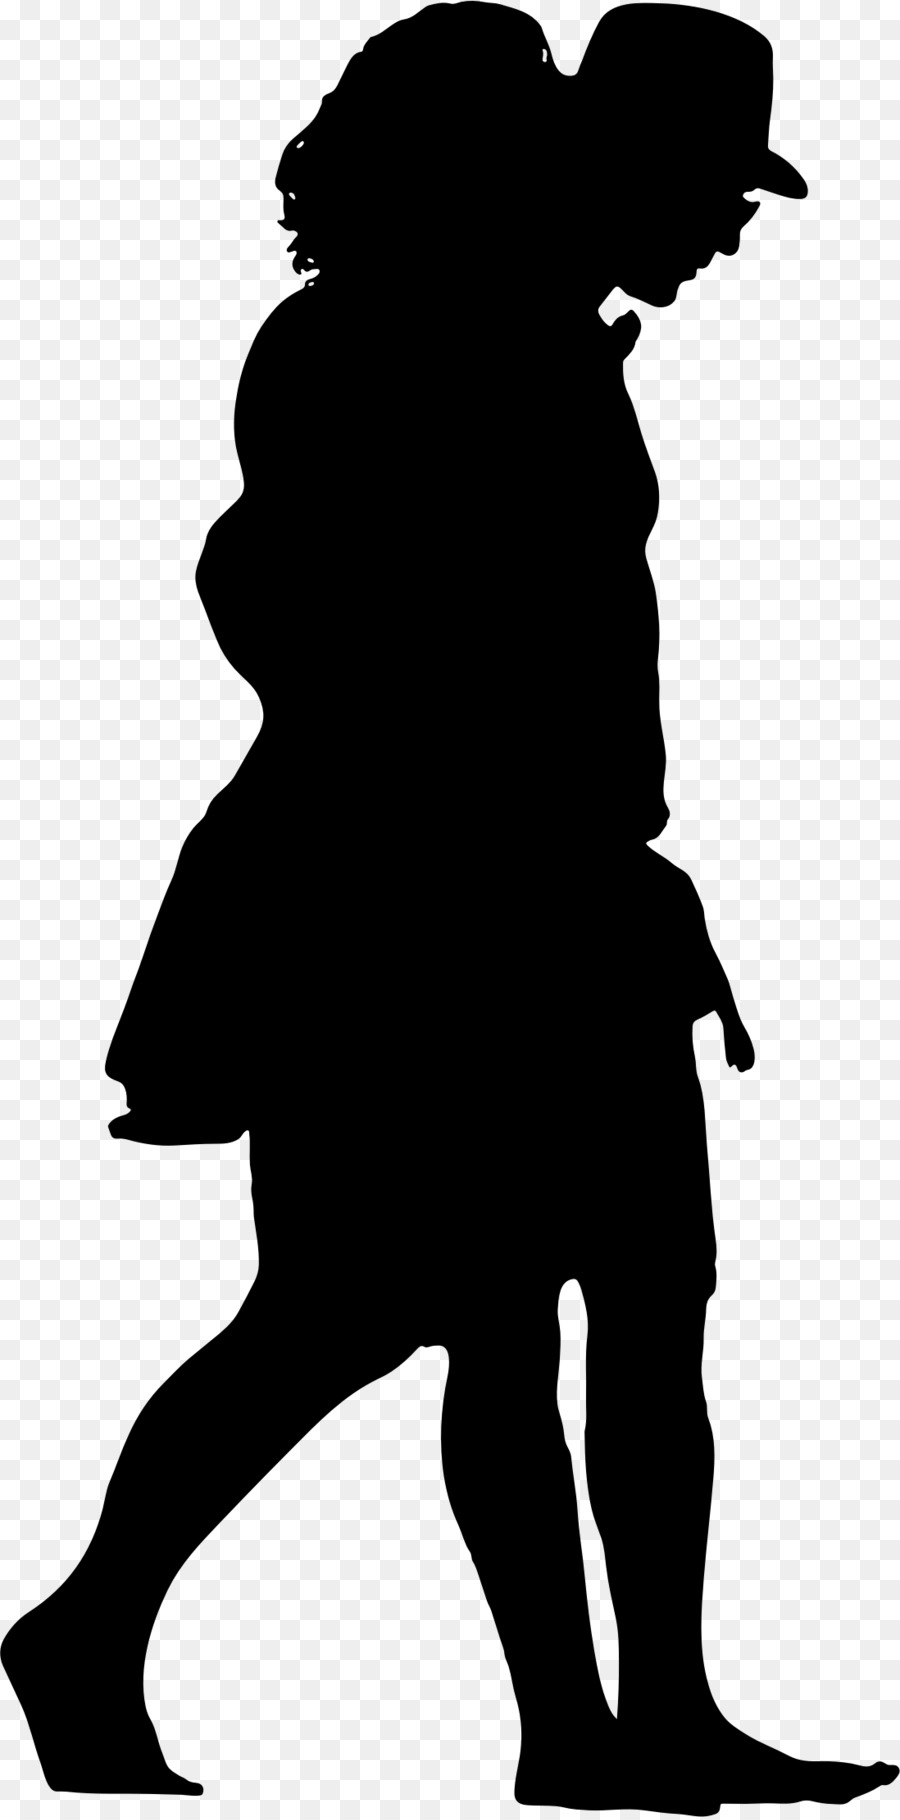 Silhouette Walking couple Clip art - silhouettes png download - 1098*2217 - Free Transparent Silhouette png Download.